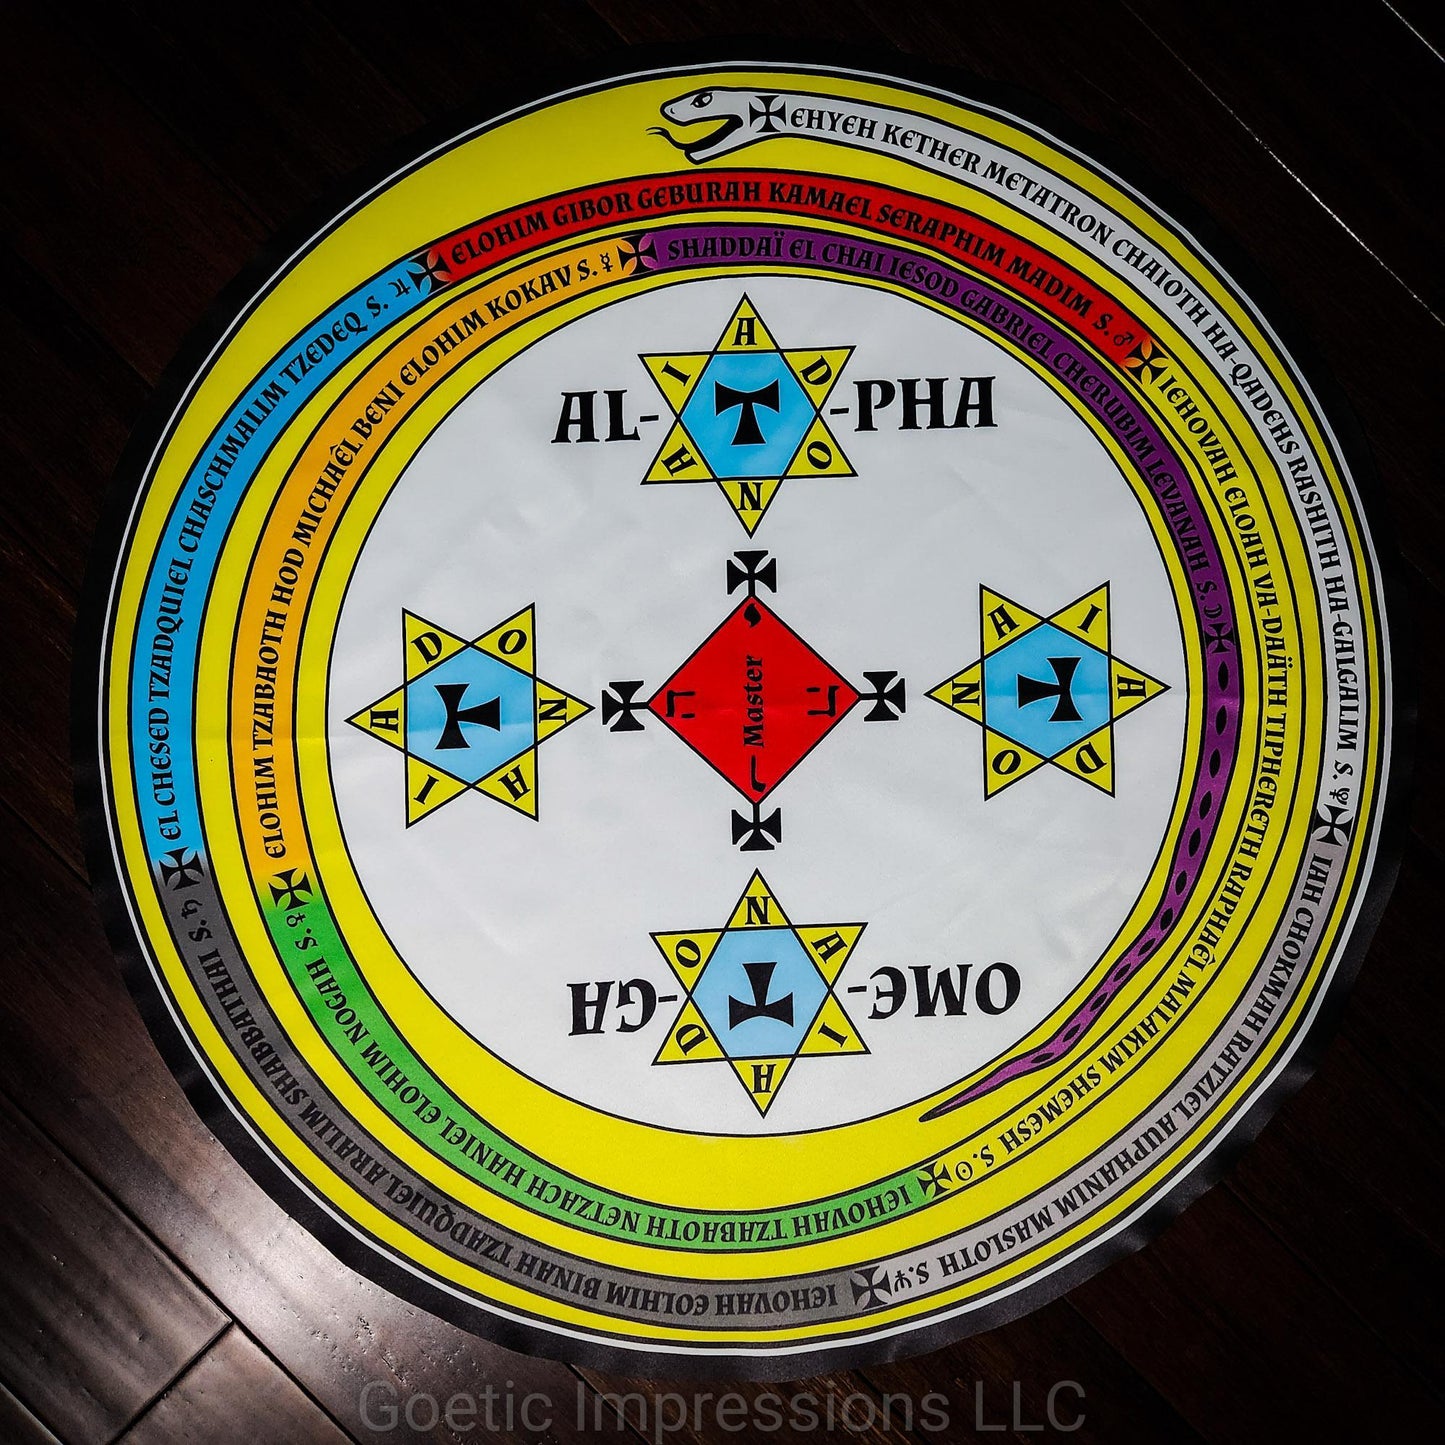 The magickal circle of solomon in full color representing the qabalistic colors. The text around the snake is in Latin 